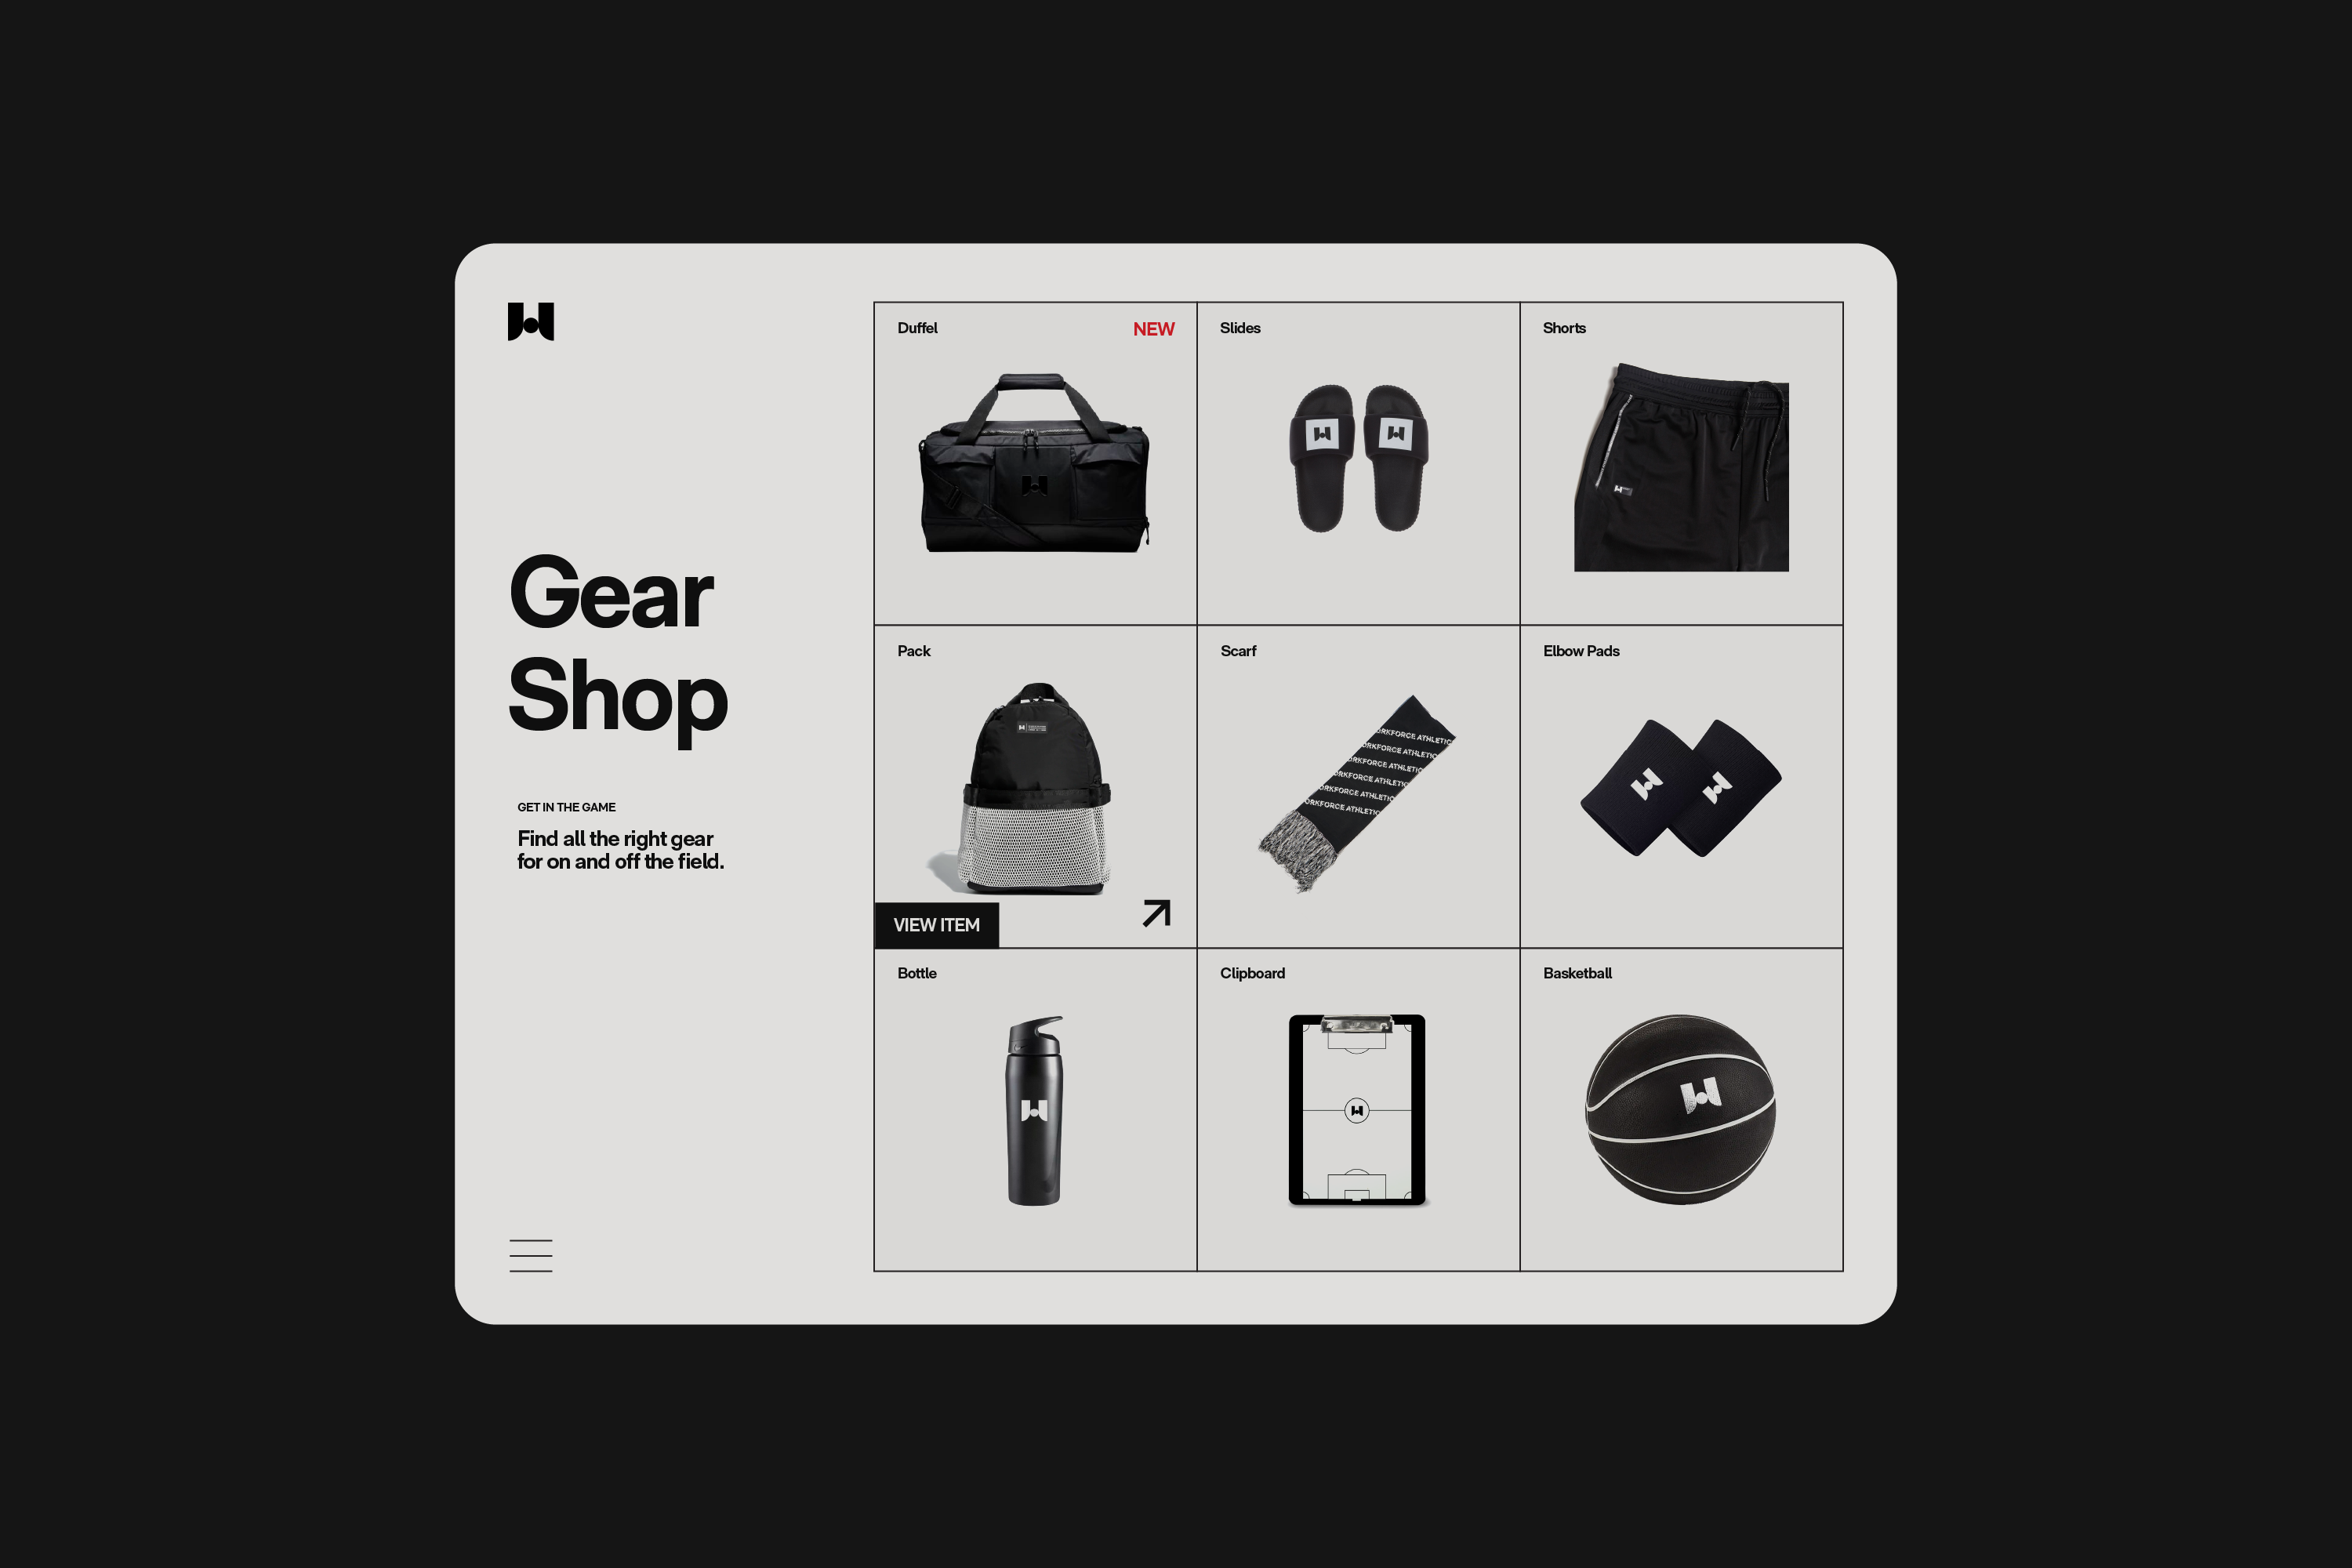 A grid with images of items that are available in the shop